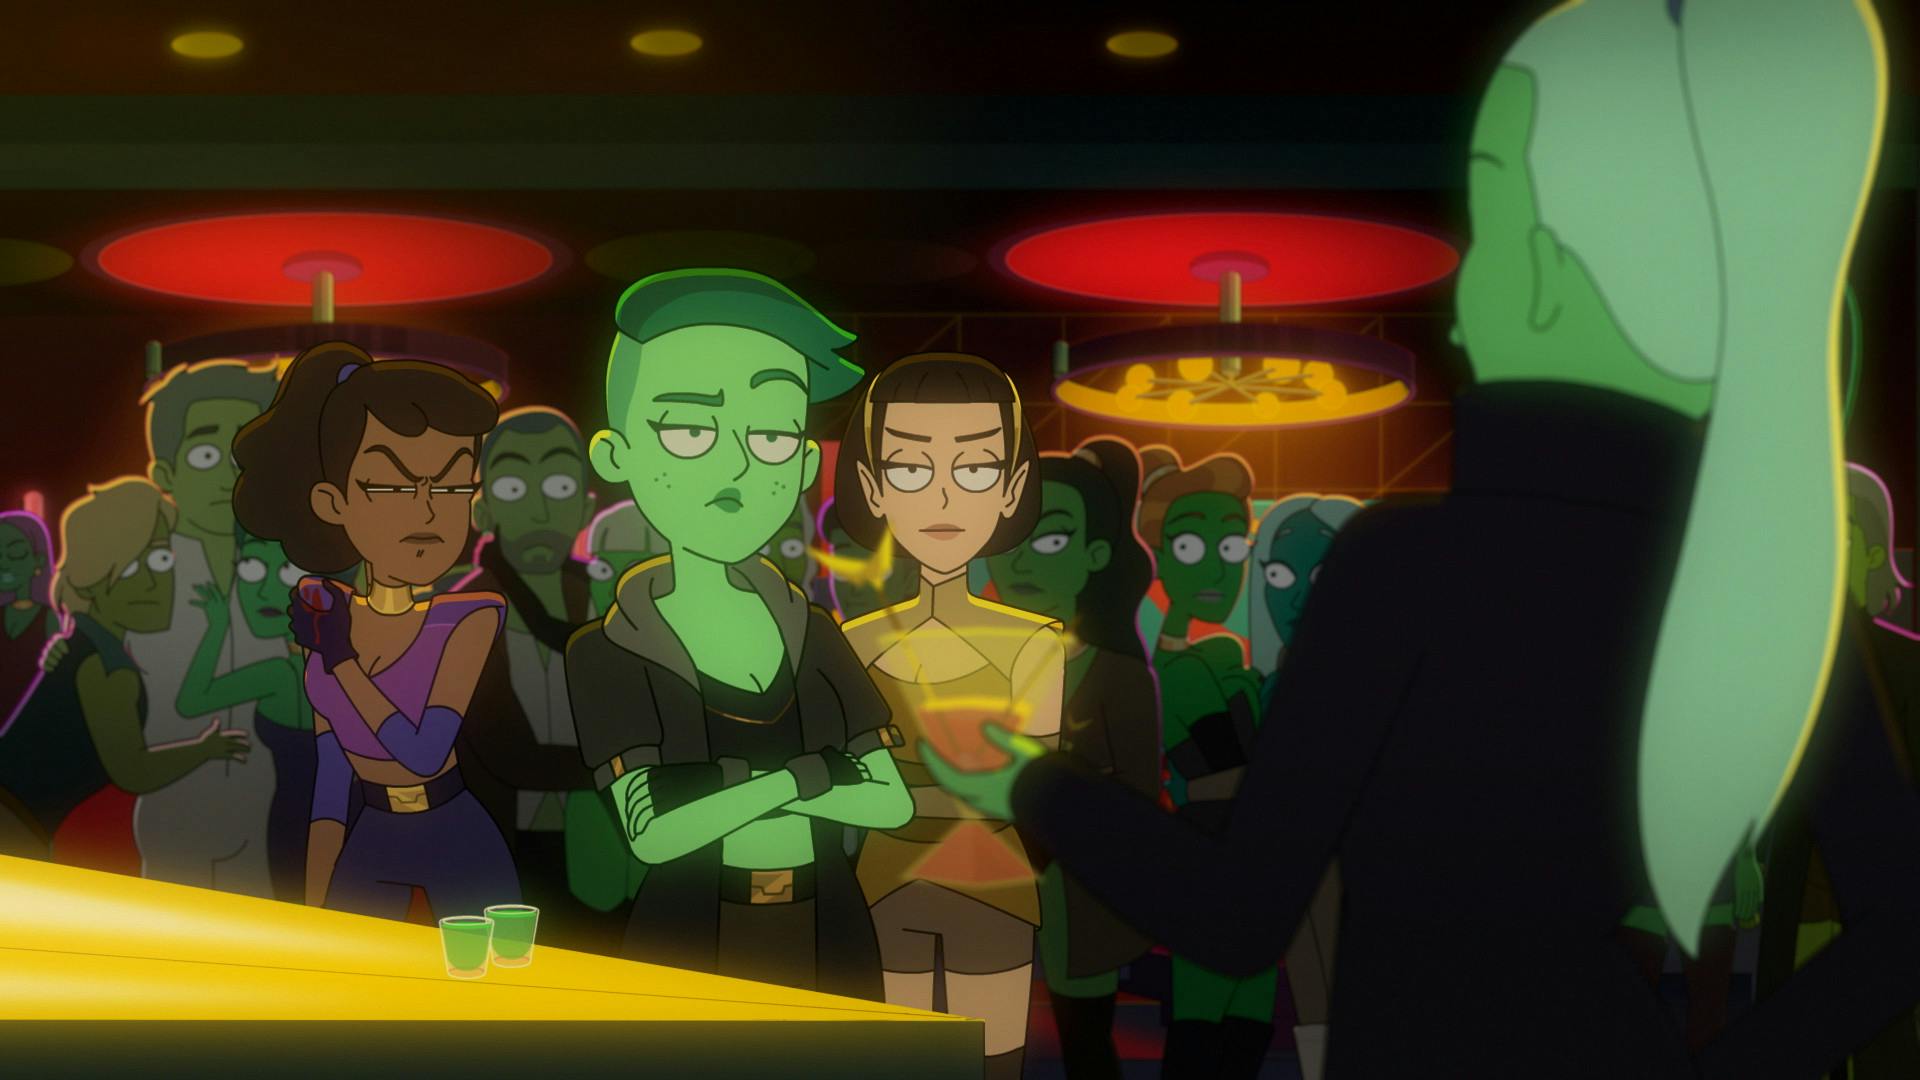 At the Slit Throat Orion Nightclub, Orions stop to watch Madame G, while holding a drink, approaches Tendi, T'Lyn, and Mariner who is applying pressure to her shoulder wound in 'Something Borrowed, Something Green' 